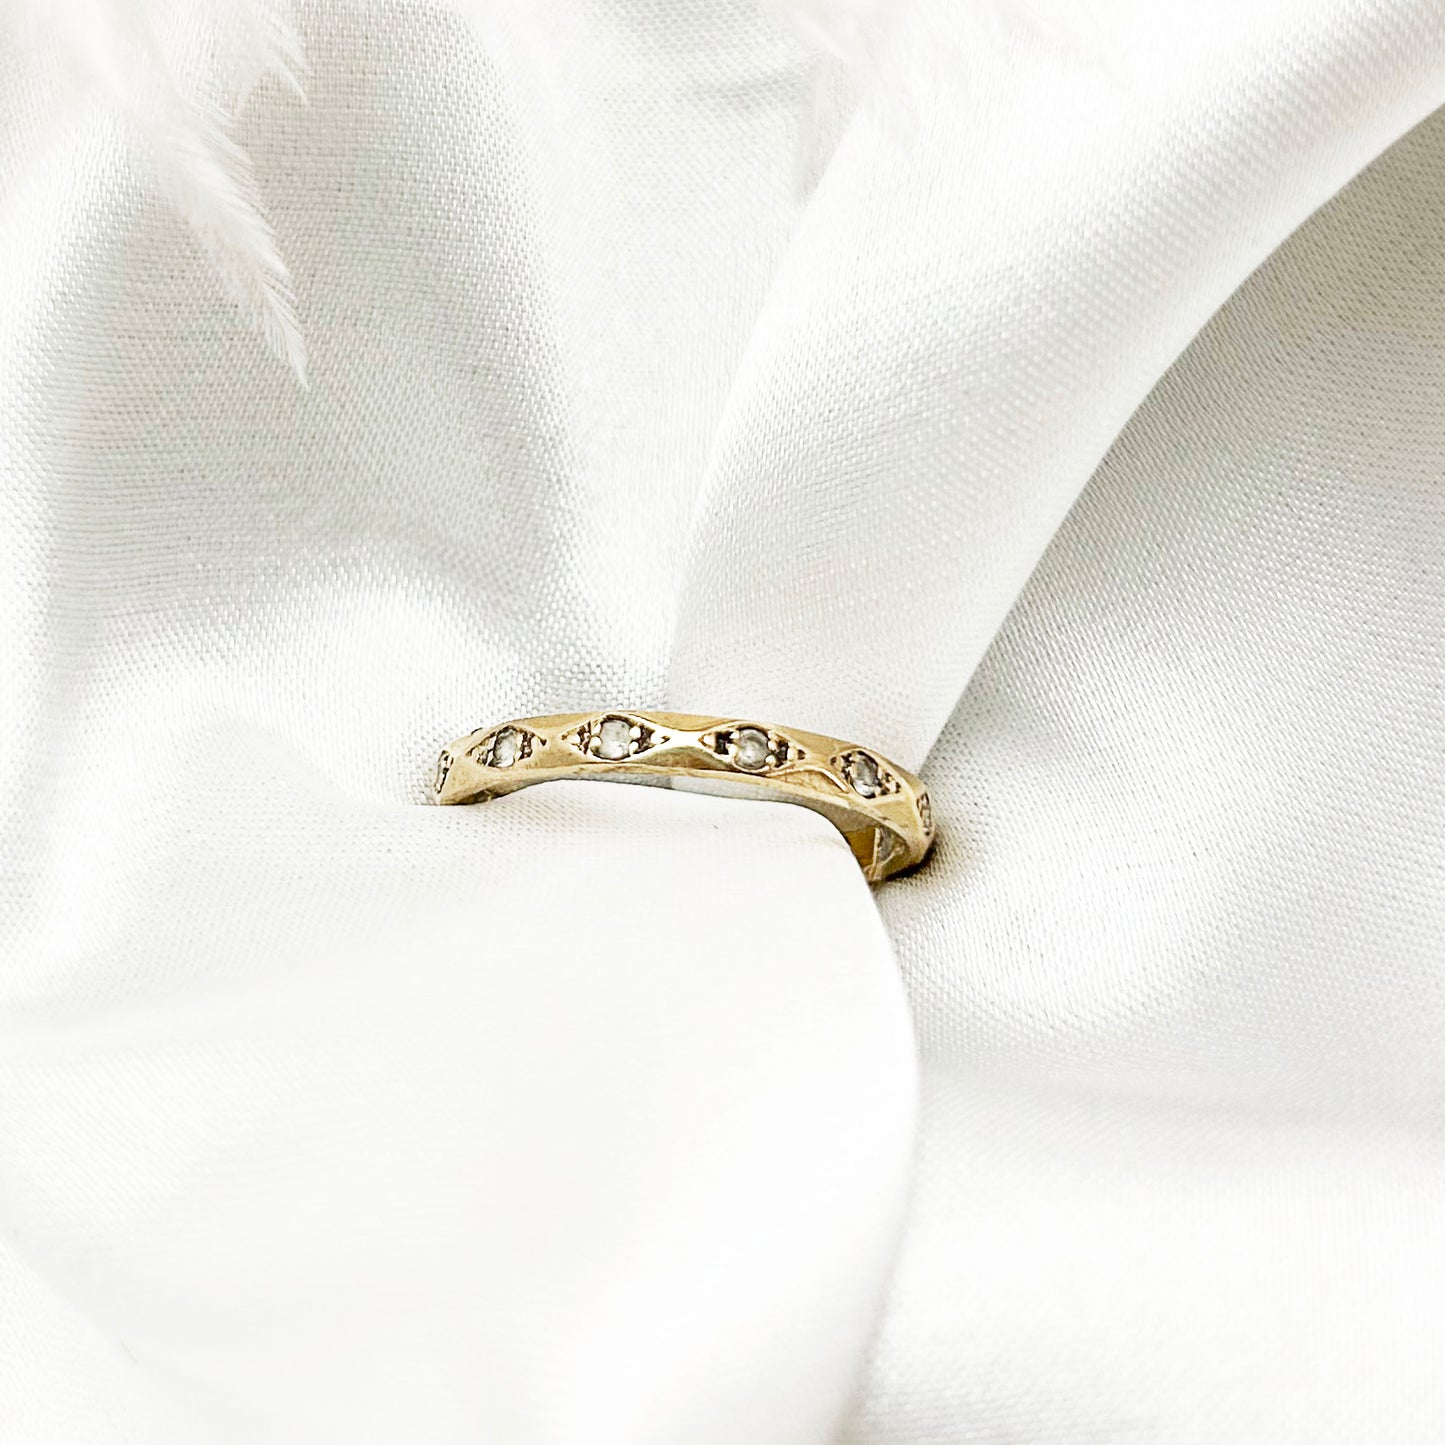 Vintage 9ct Gold & Spinnel Ring